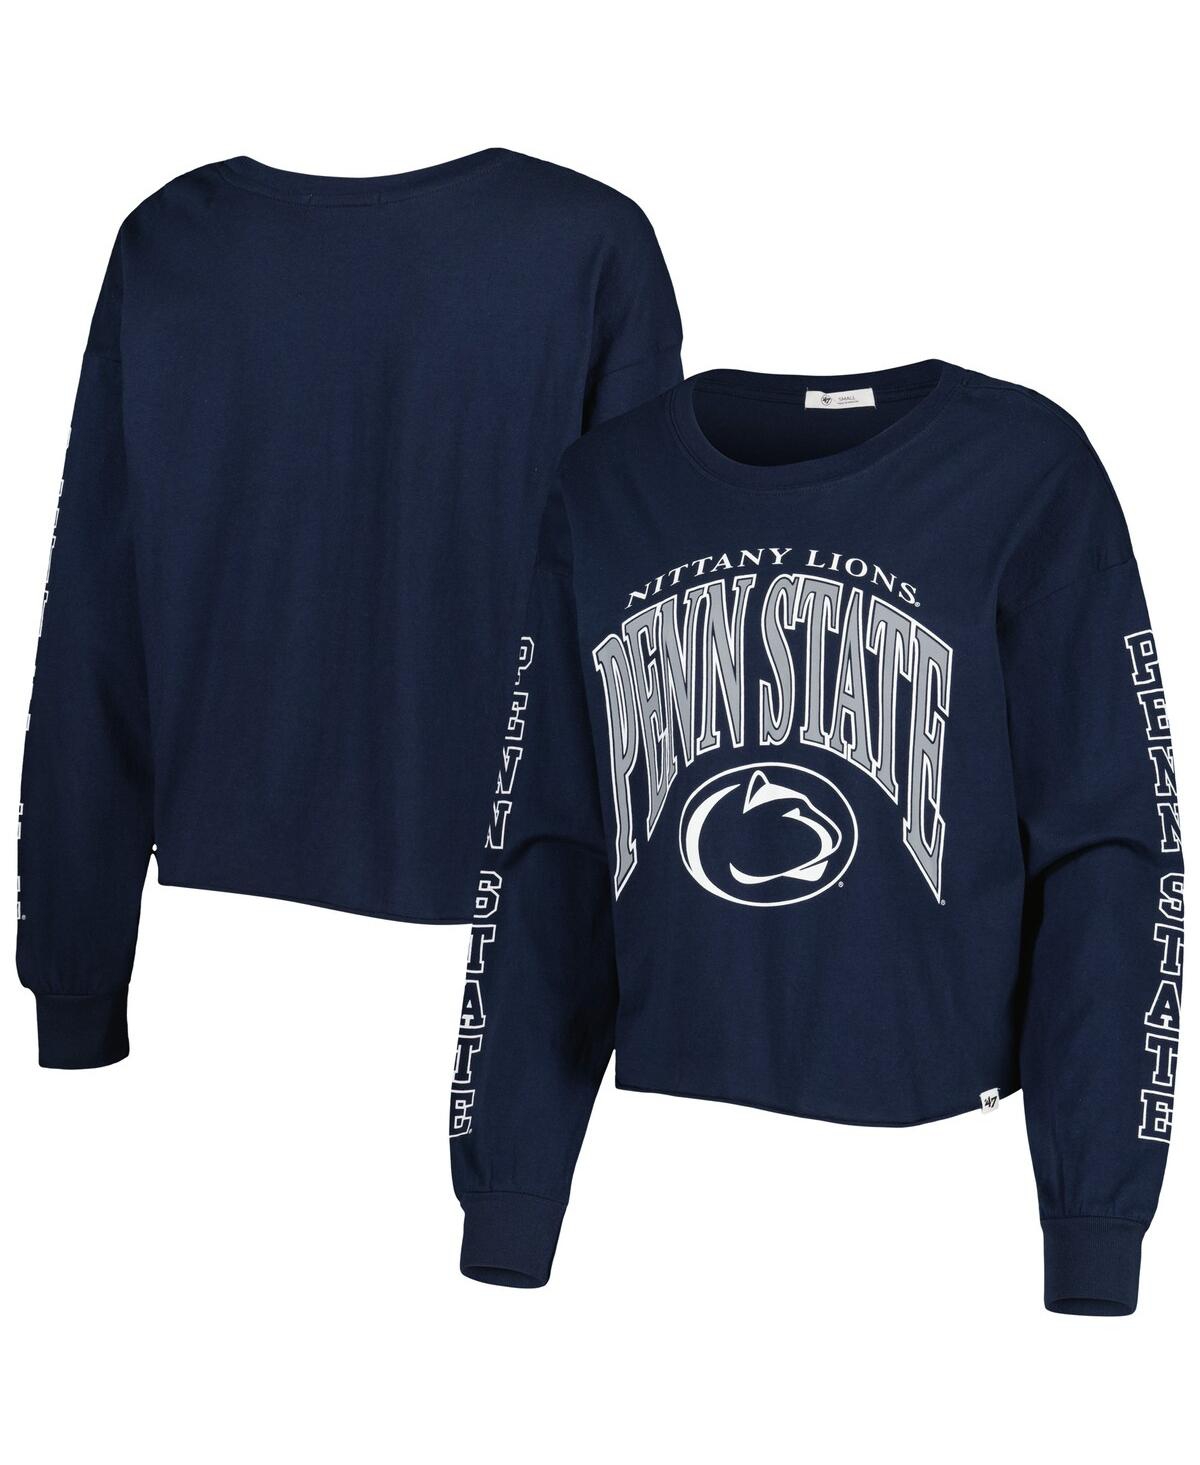 47 Brand Women's ' Navy Penn State Nittany Lions Parkway Ii Cropped Long Sleeve T-shirt